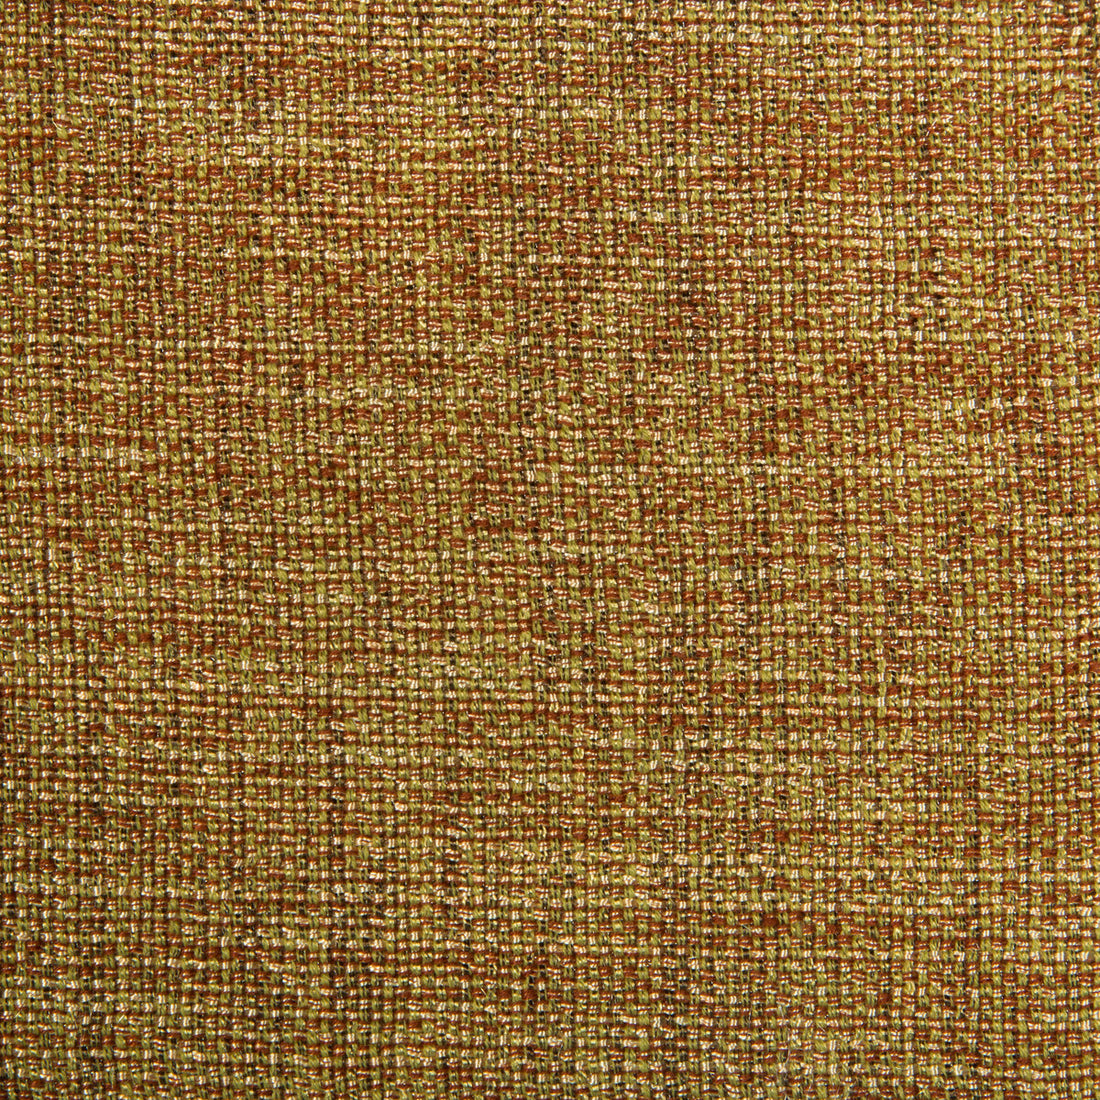 Kravet Contract fabric in 4458-324 color - pattern 4458.324.0 - by Kravet Contract